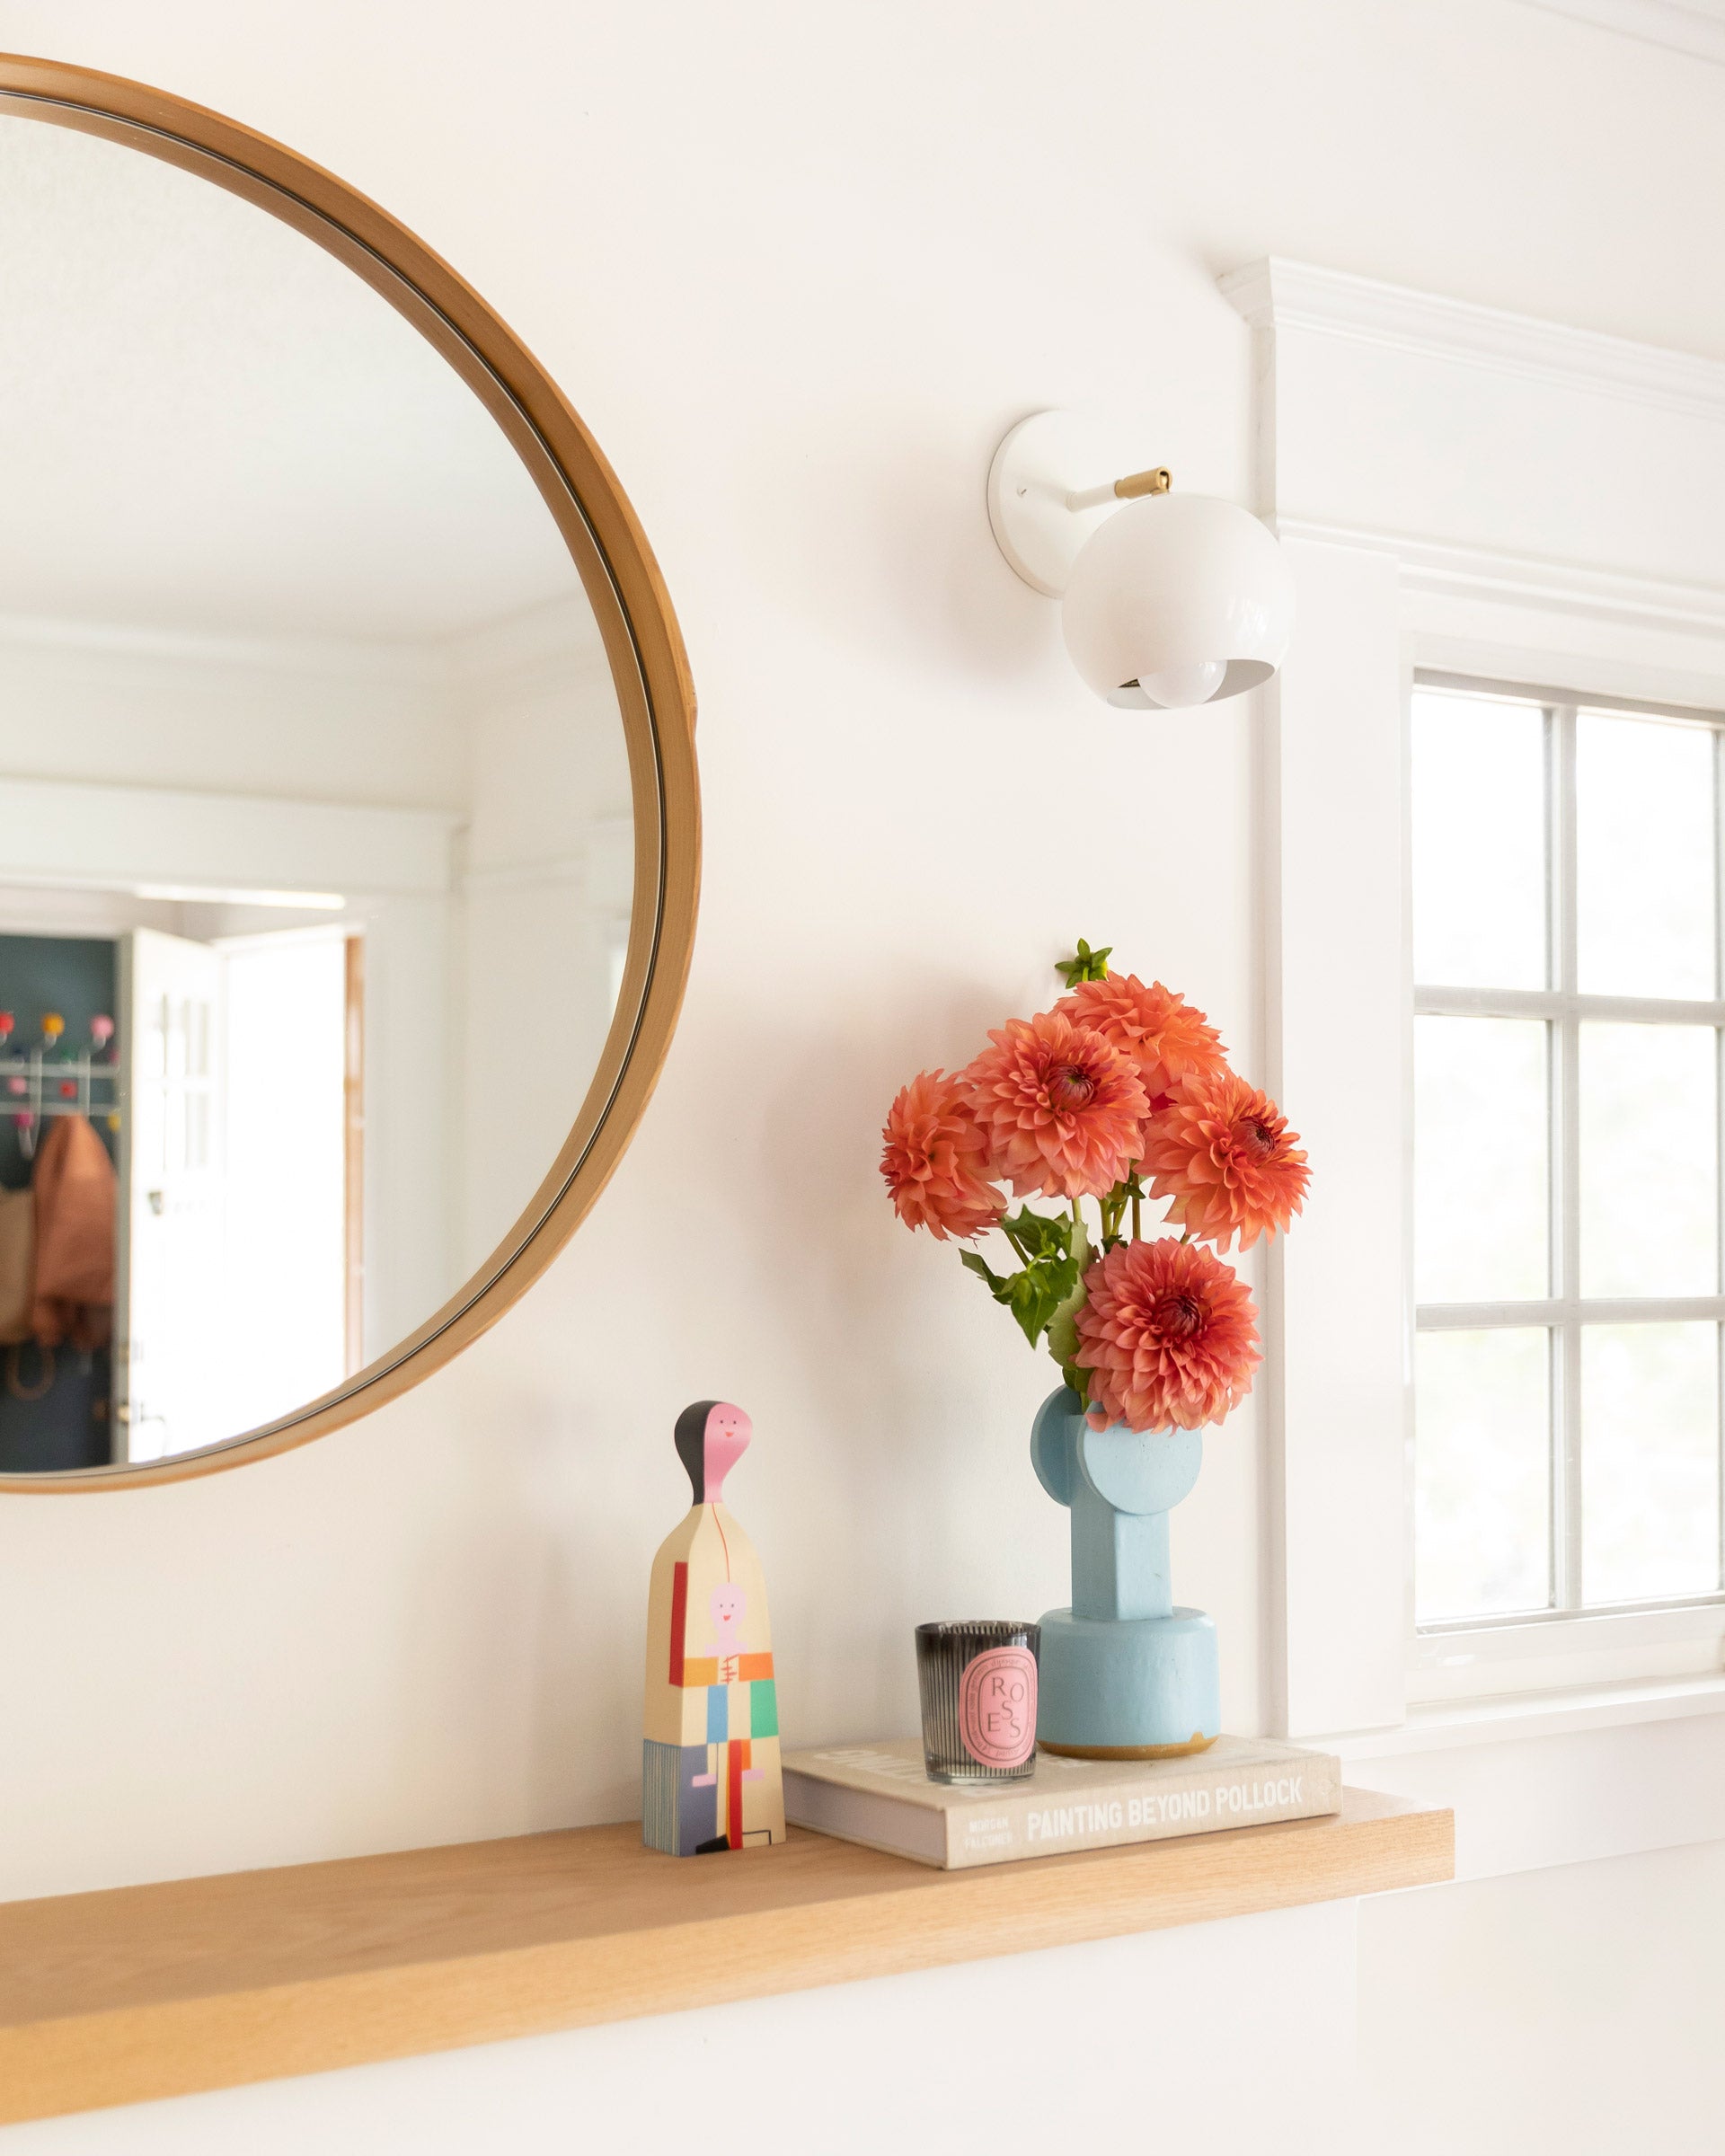 A wall sconce above a mantel.